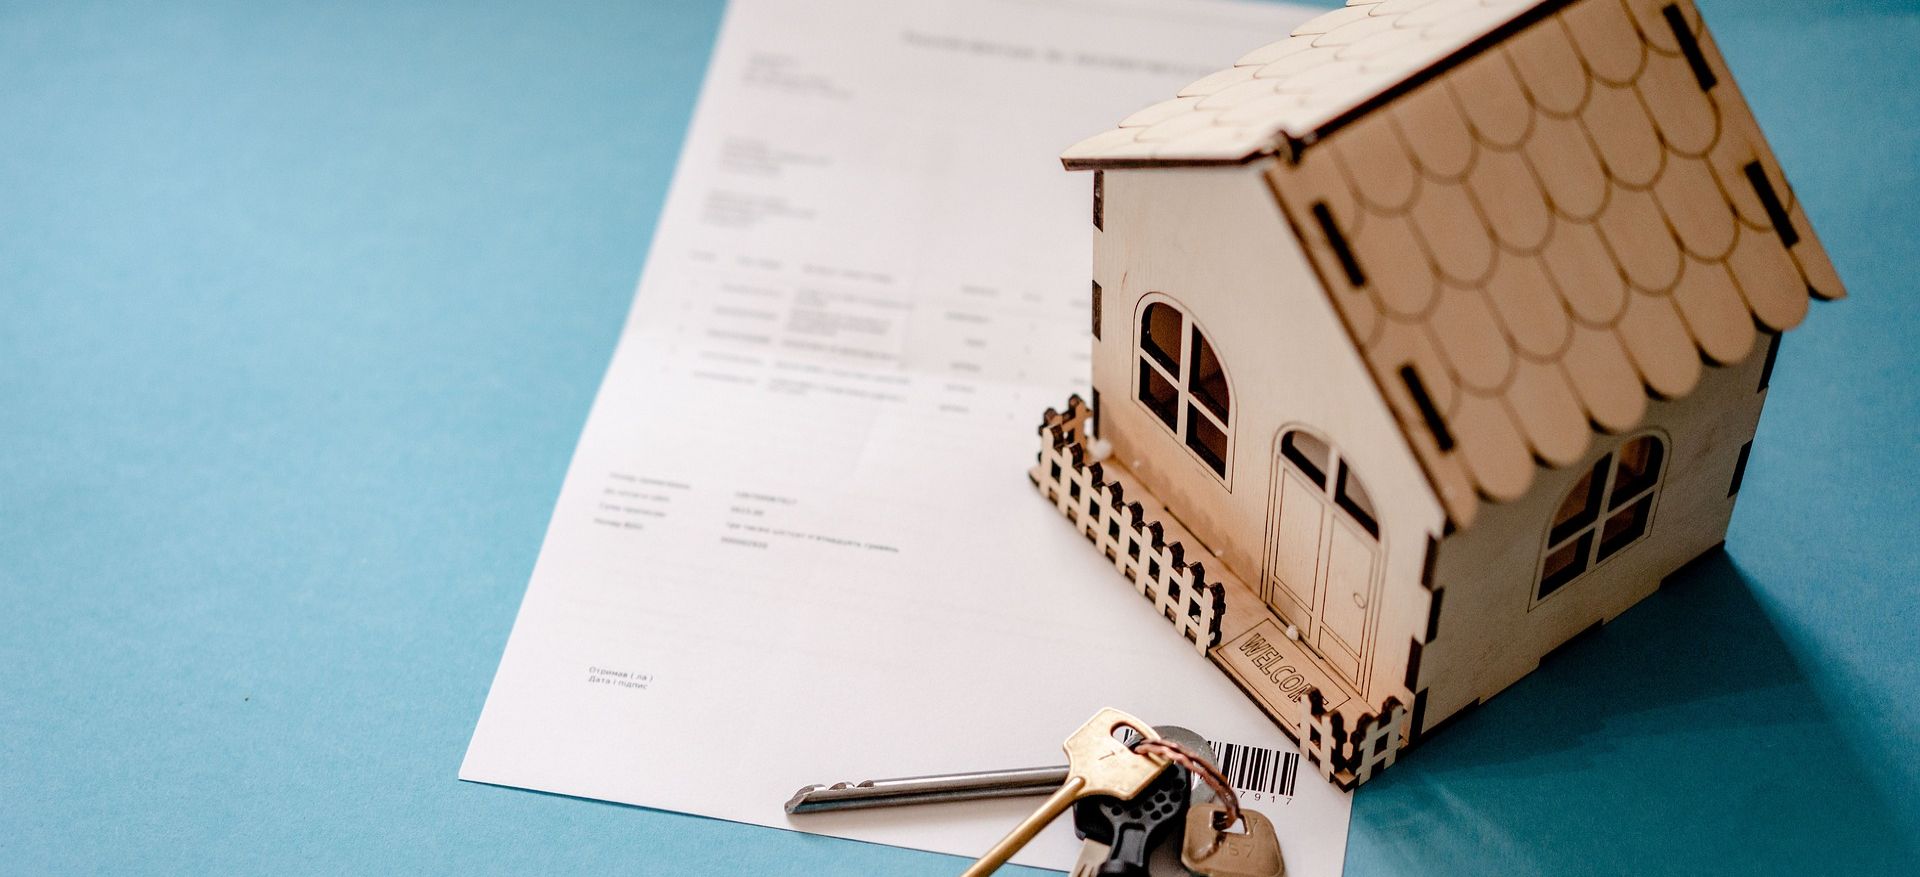 Differences between a fixed and variable mortgage